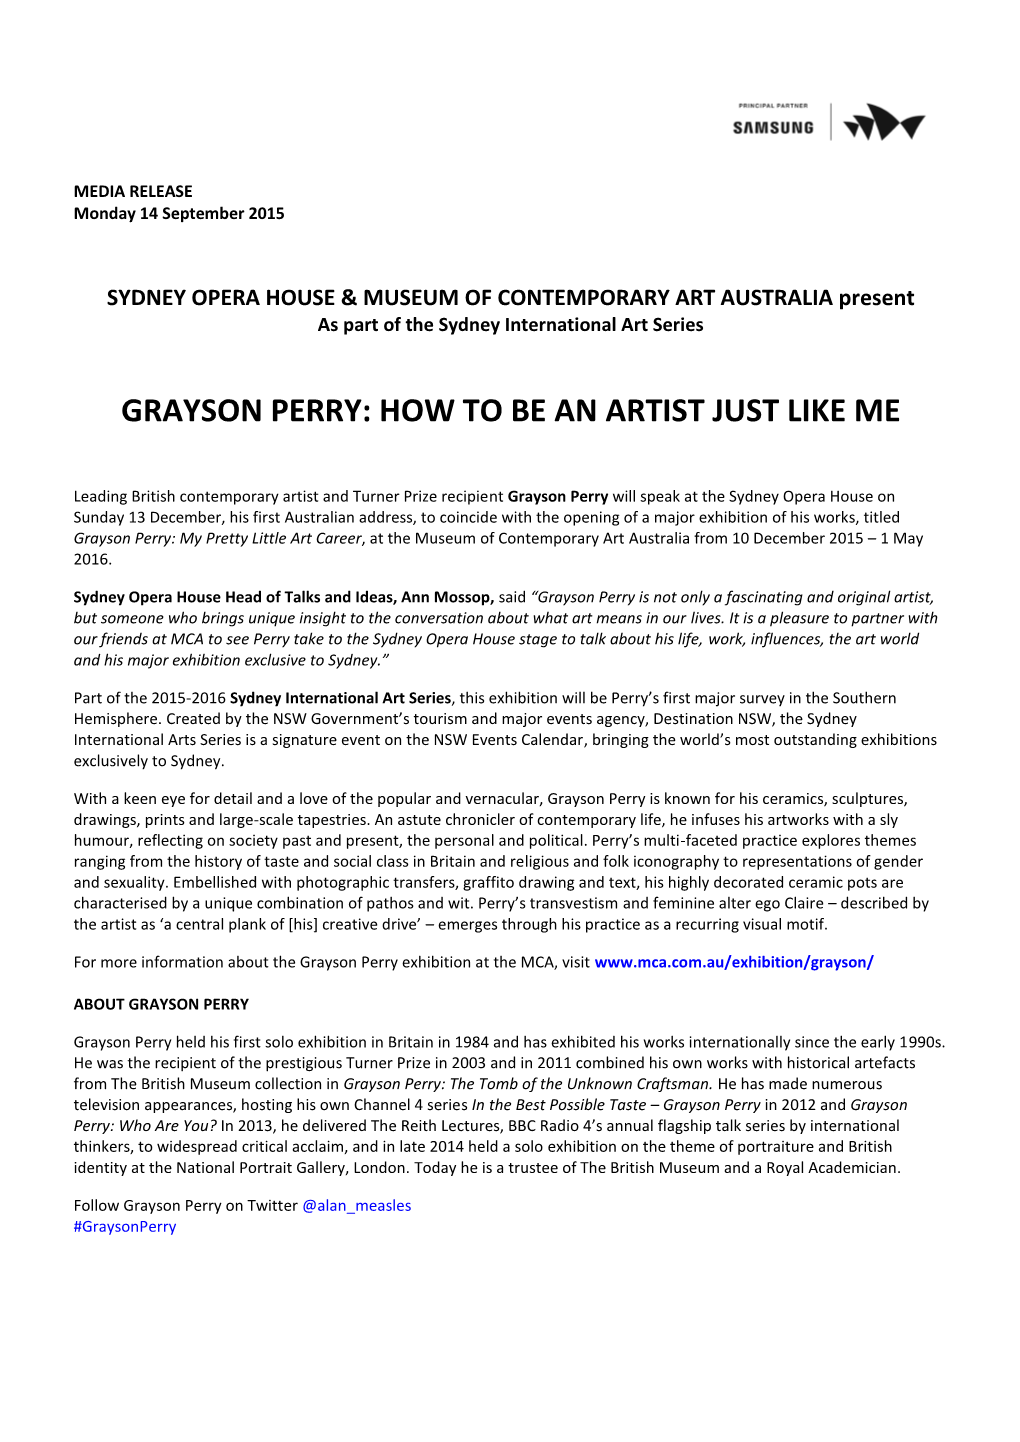 Grayson Perry: How to Be an Artist Just Like Me